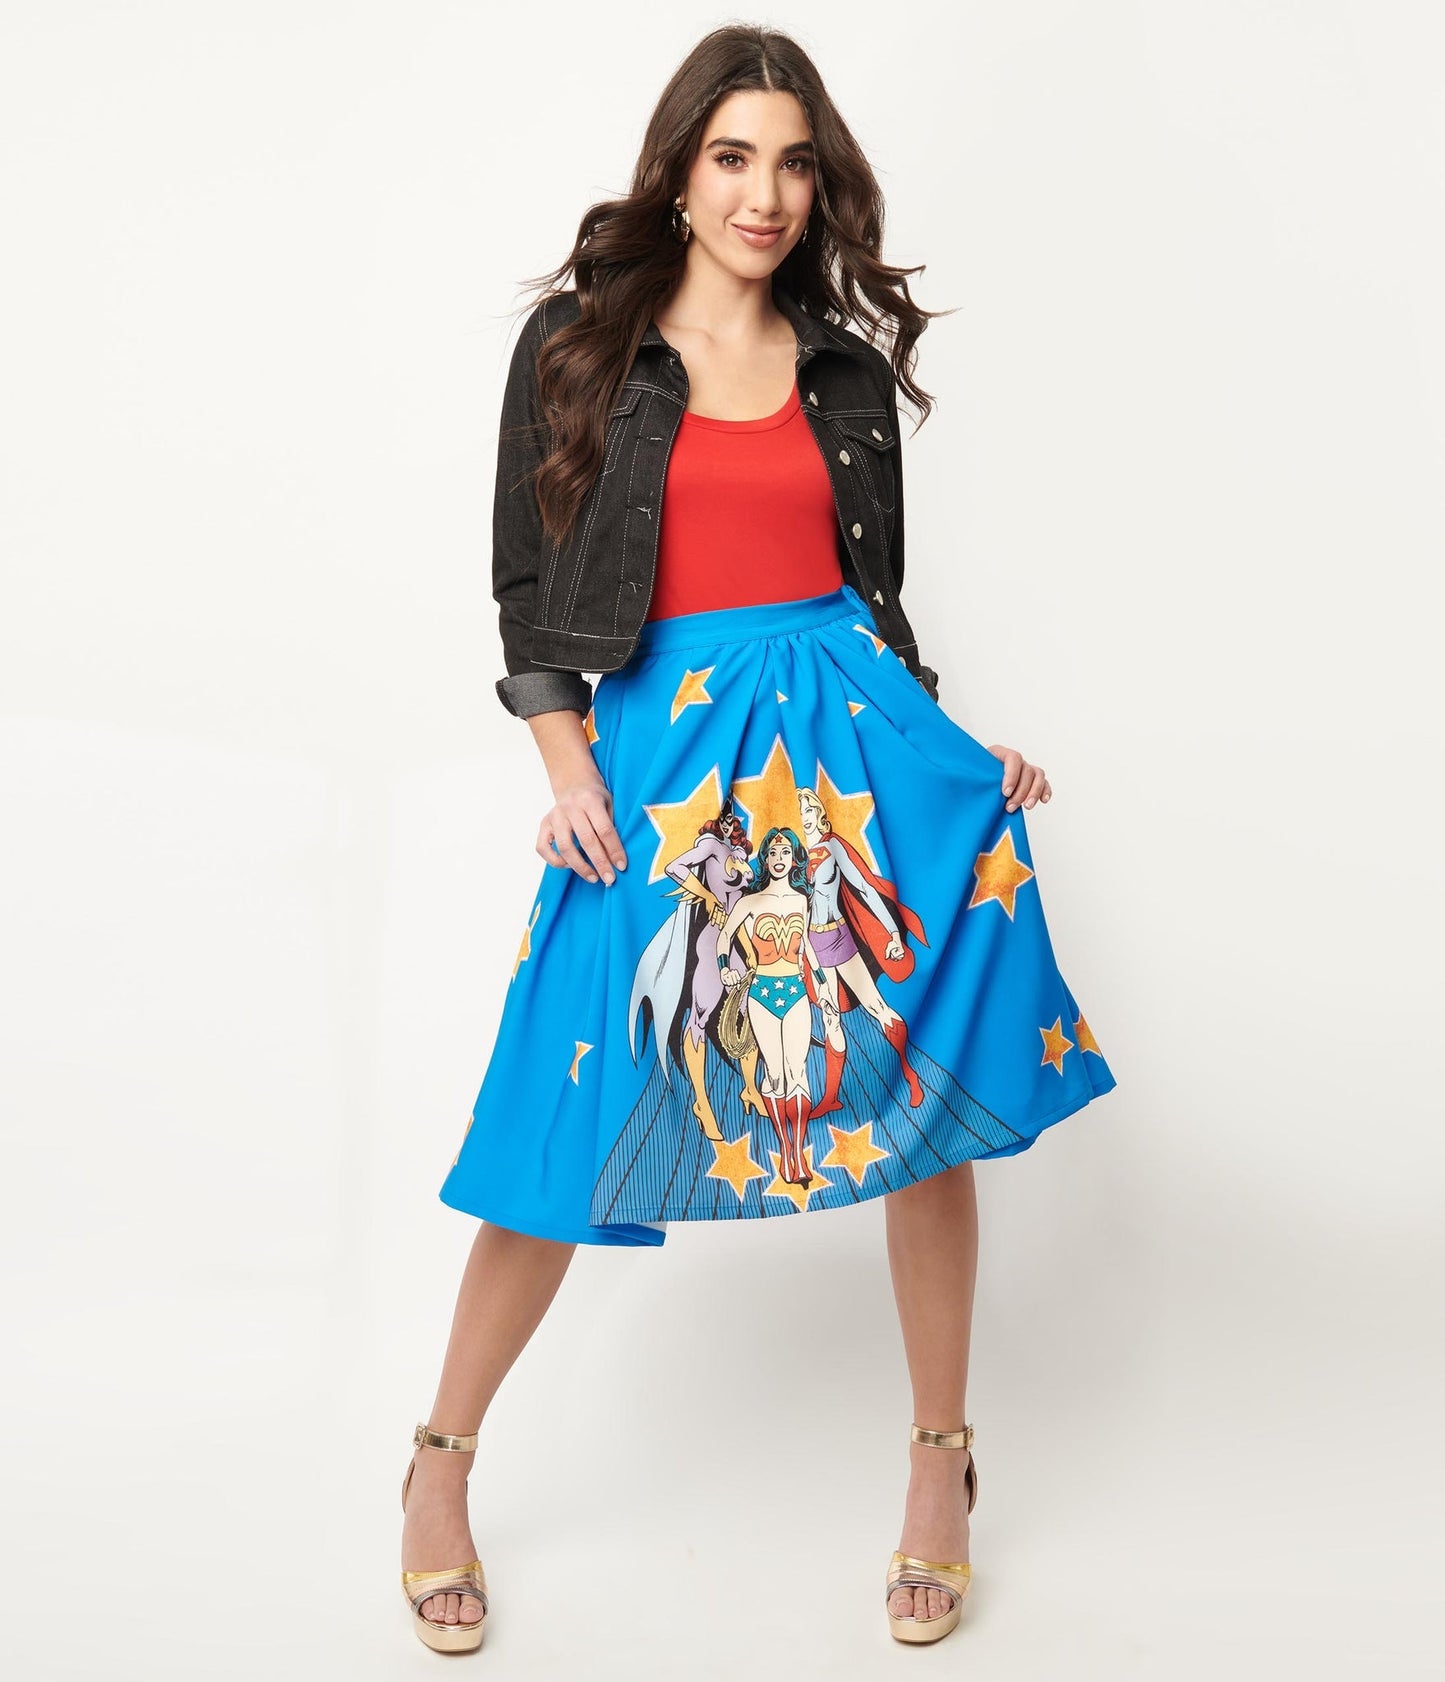 Women Of DC Main Attraction Swing Skirt - Rockamilly-Skirts & Shorts-Vintage